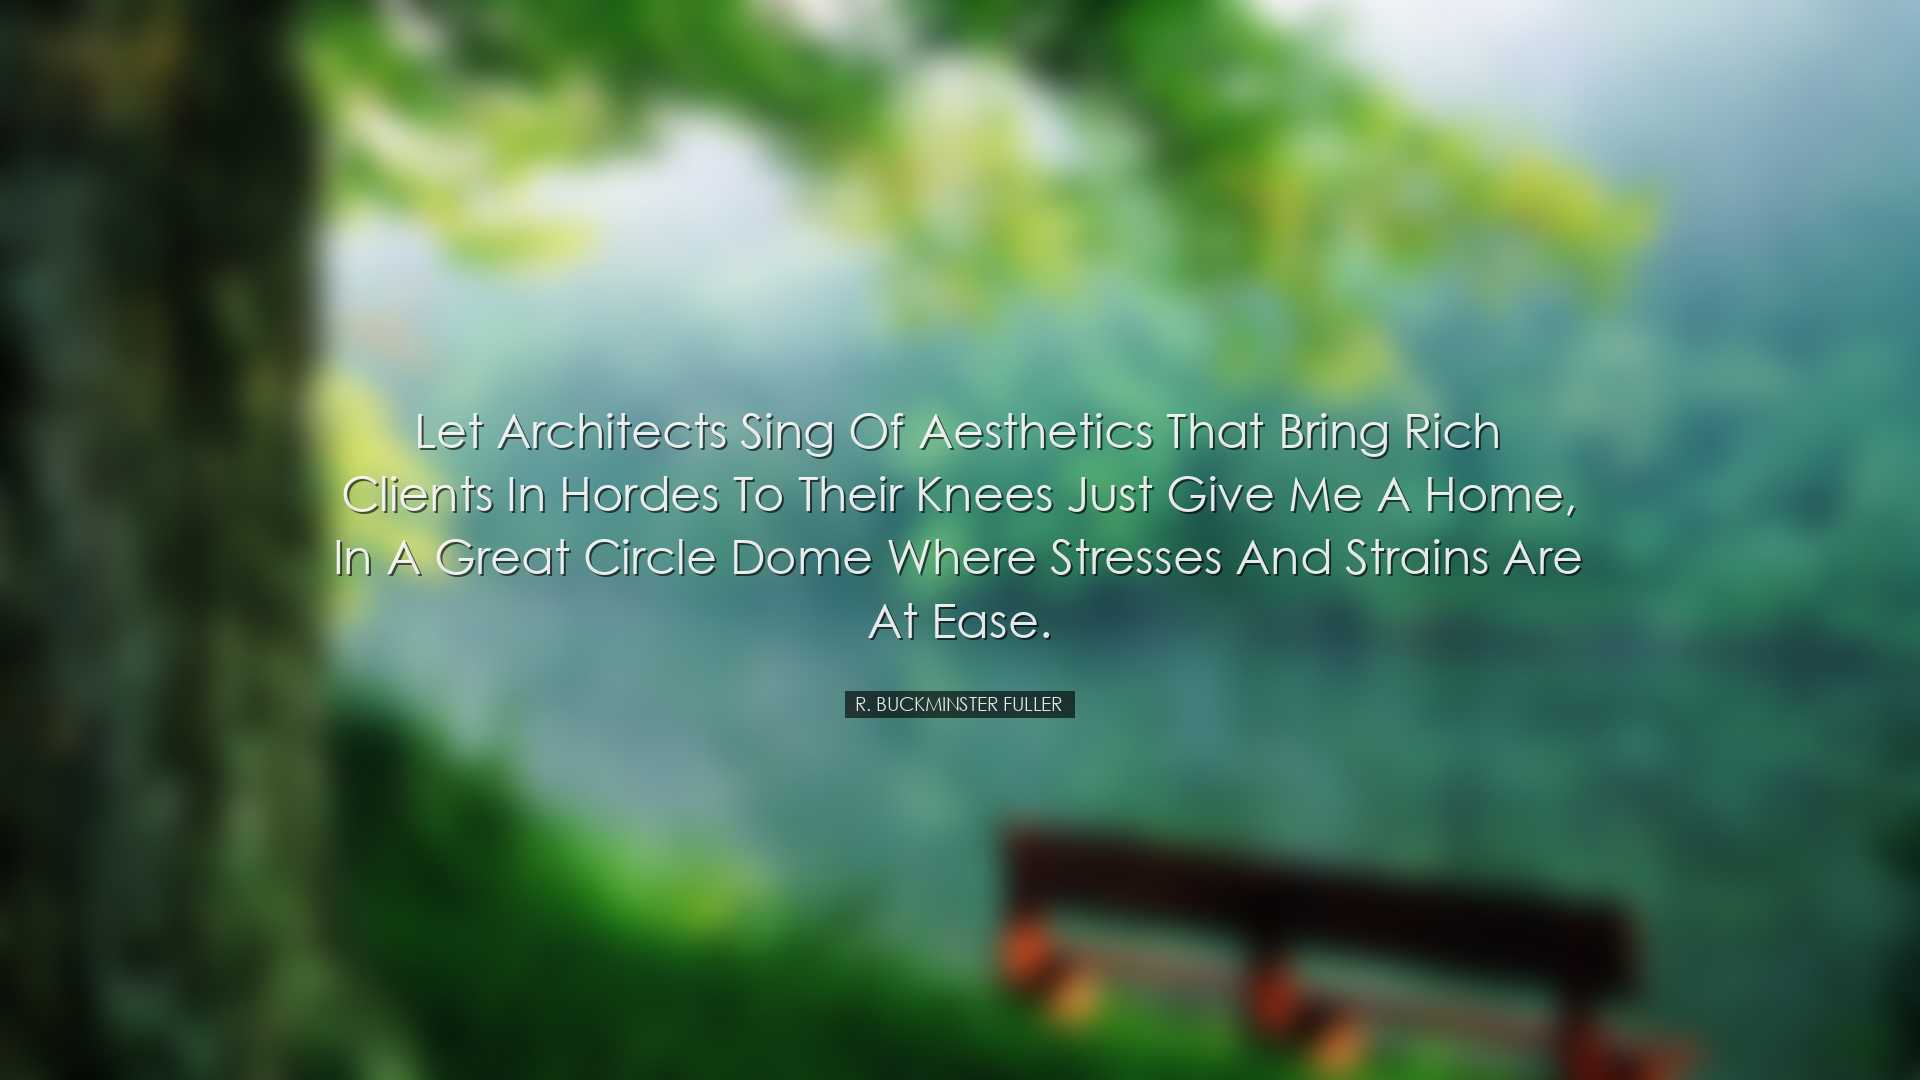 Let architects sing of aesthetics that bring Rich clients in horde